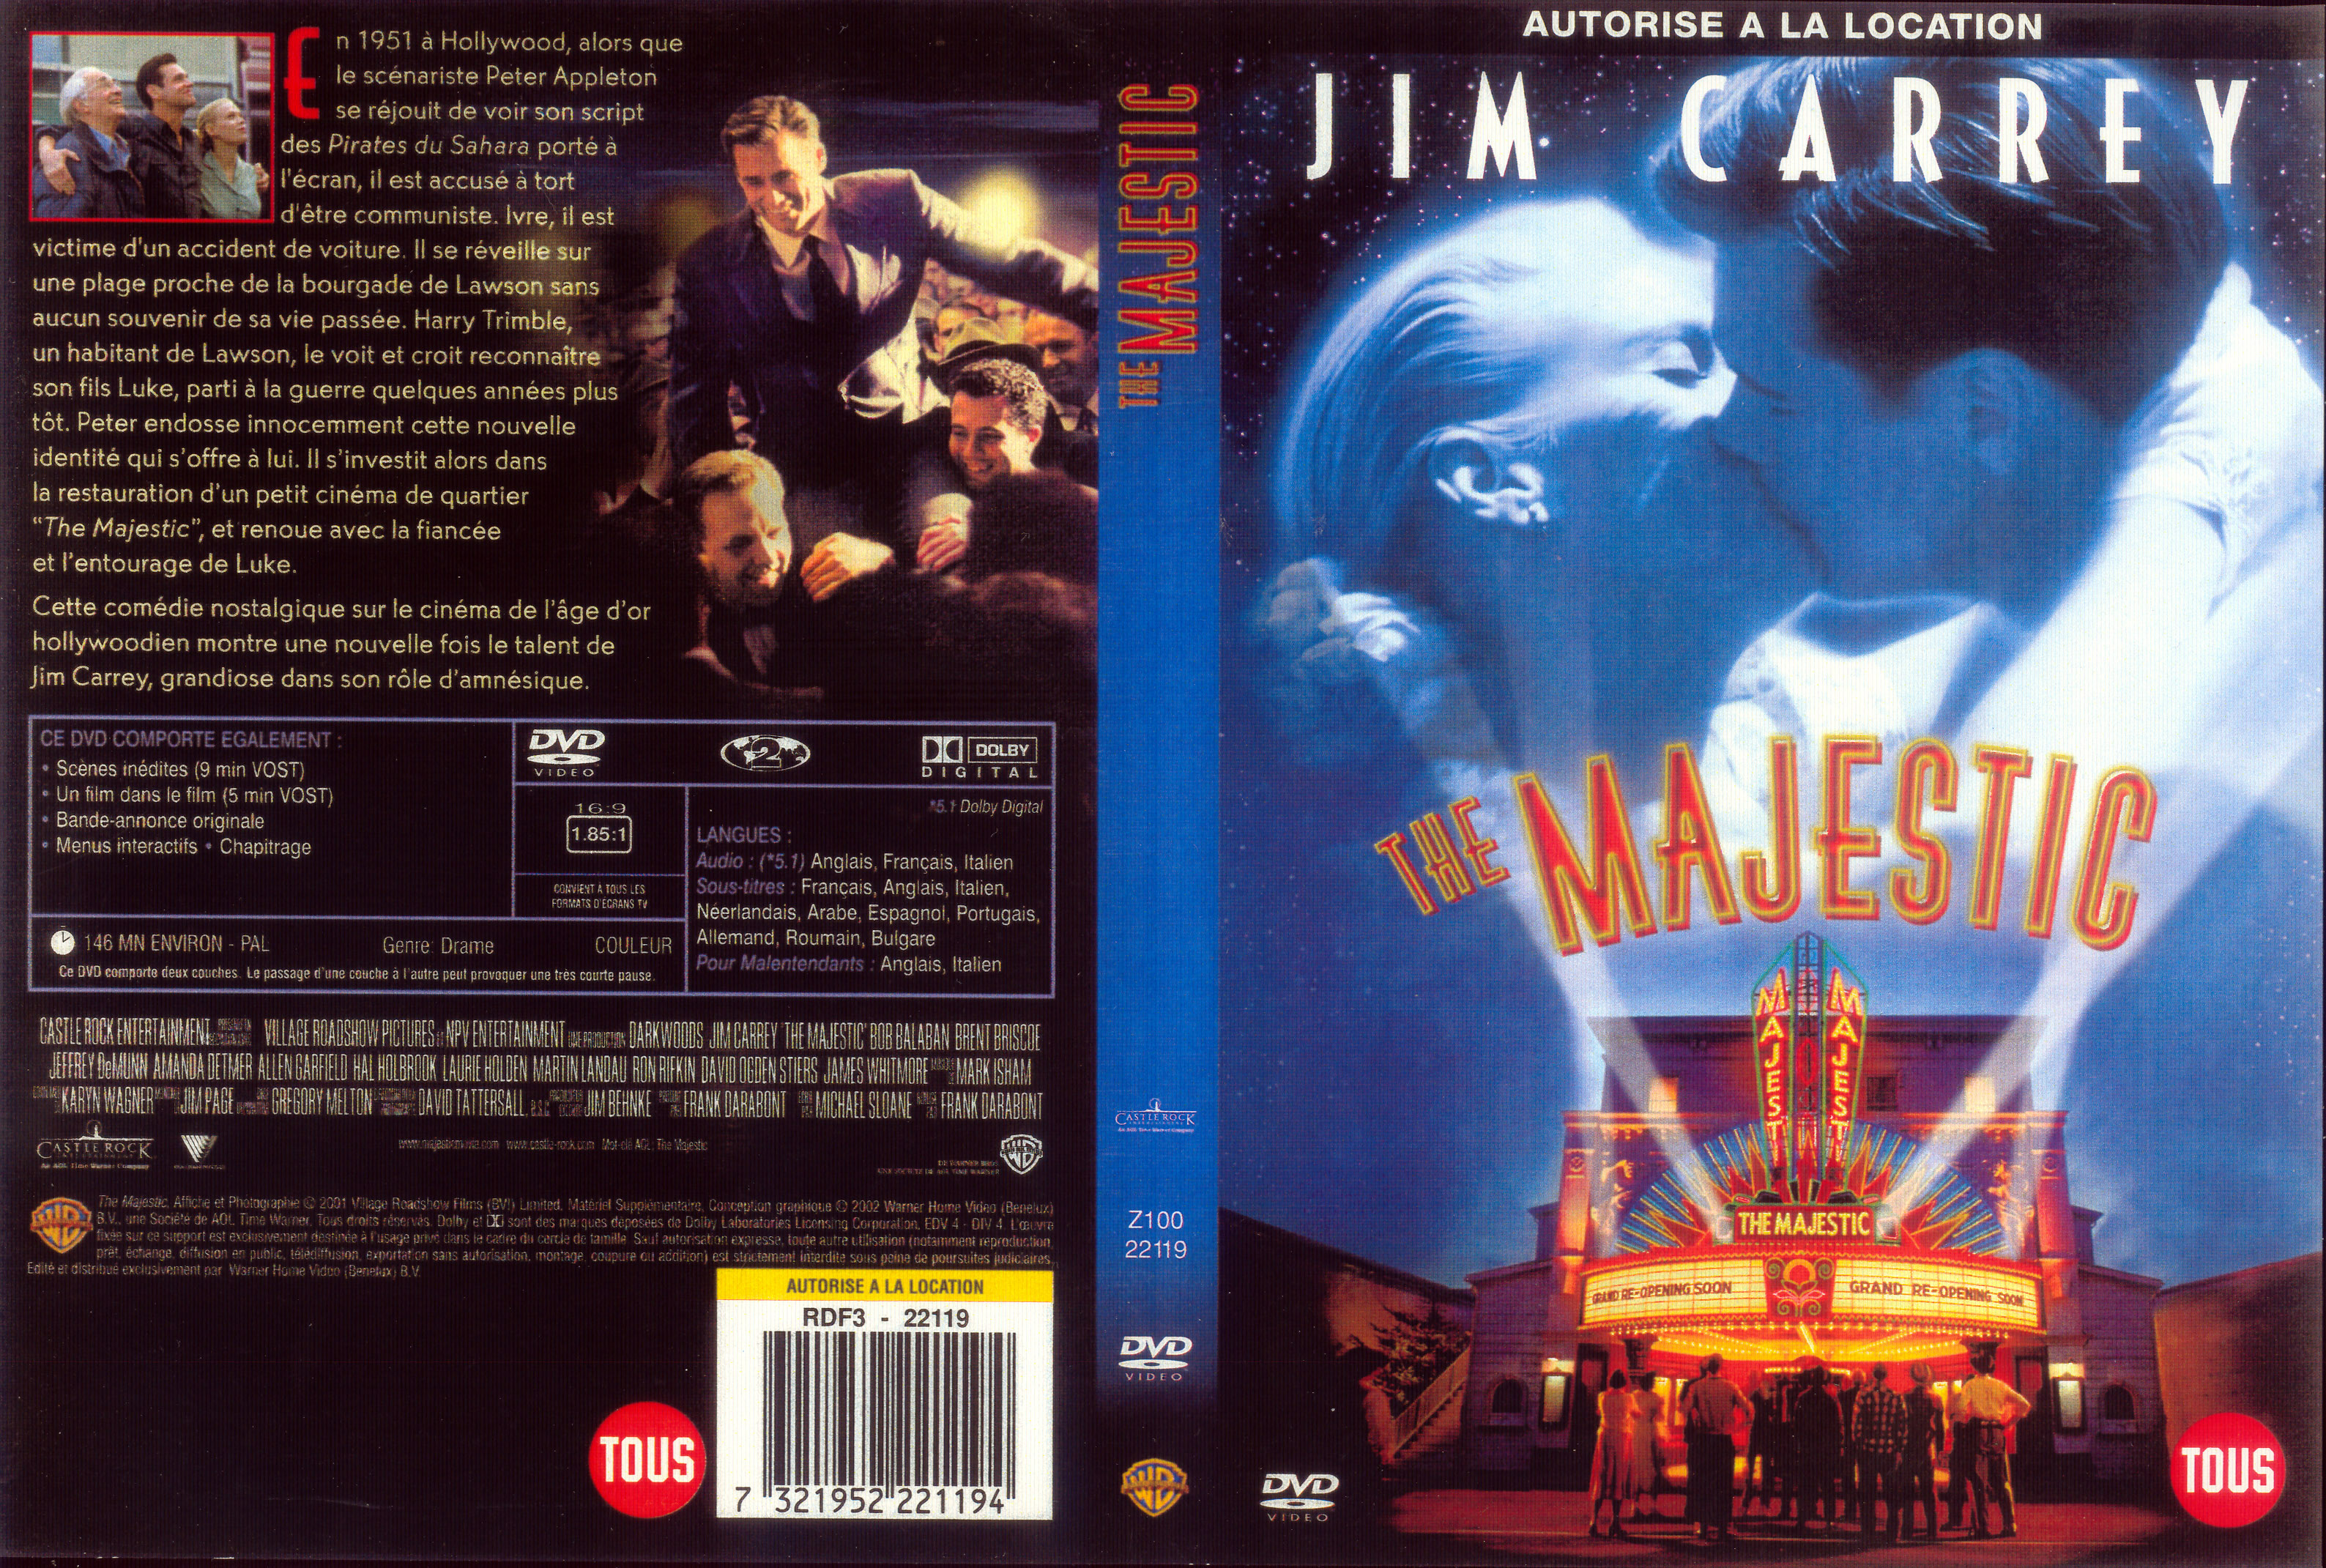 Jaquette DVD The majestic